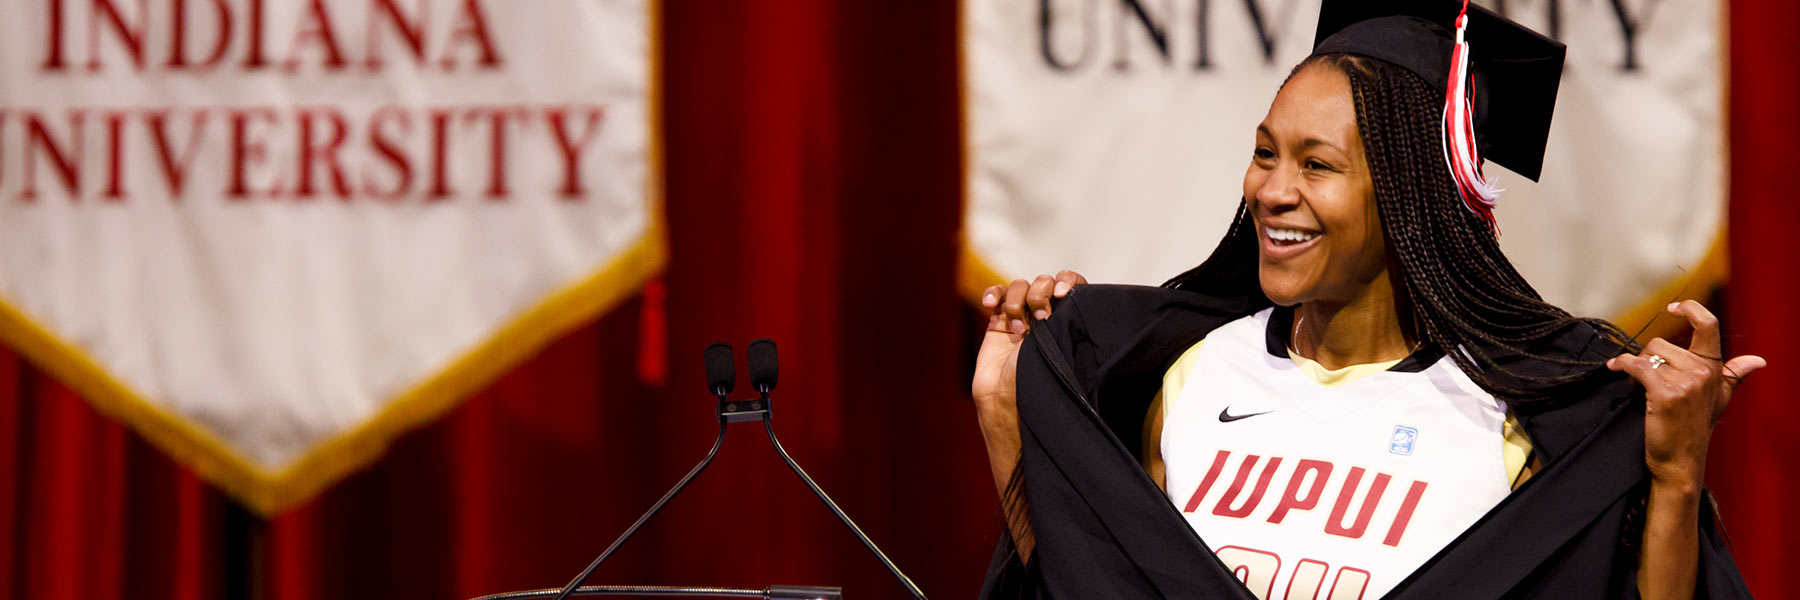 Past commencement speaker Tamika Catchings stands at a podium opening up her commencement gown to reveal an IUPUI Jags basketball jersey